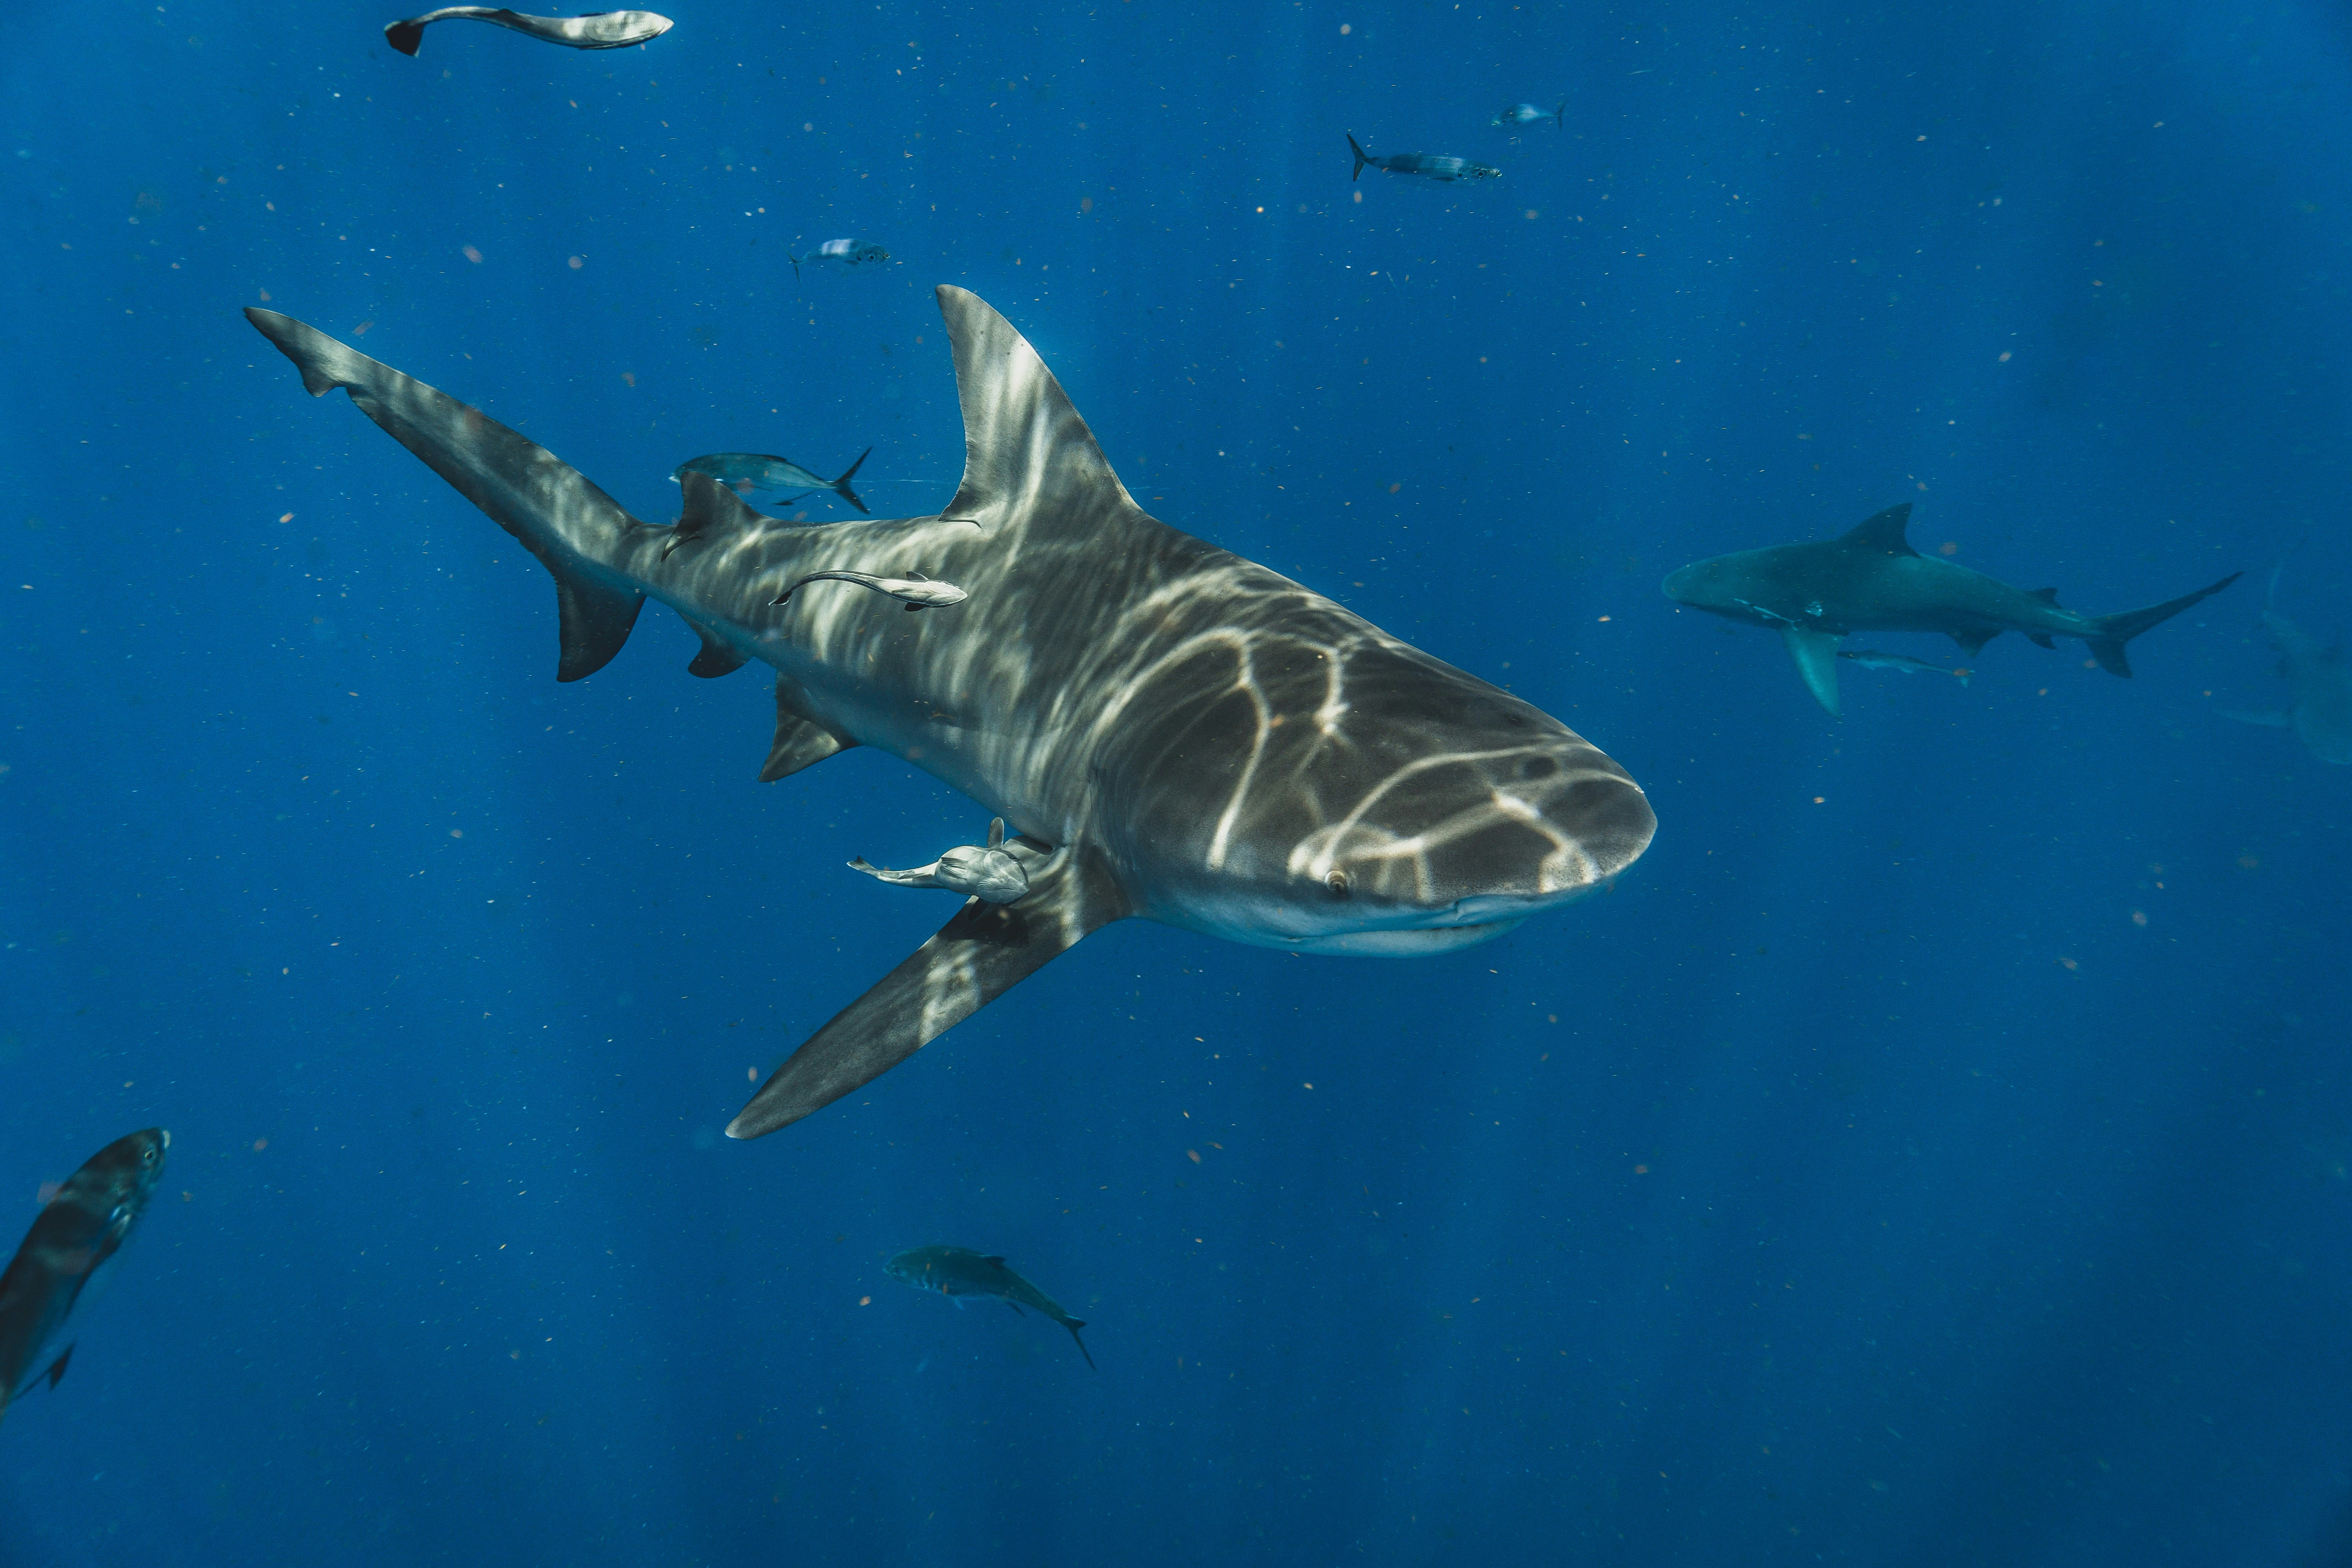 grey shark in water during daytime